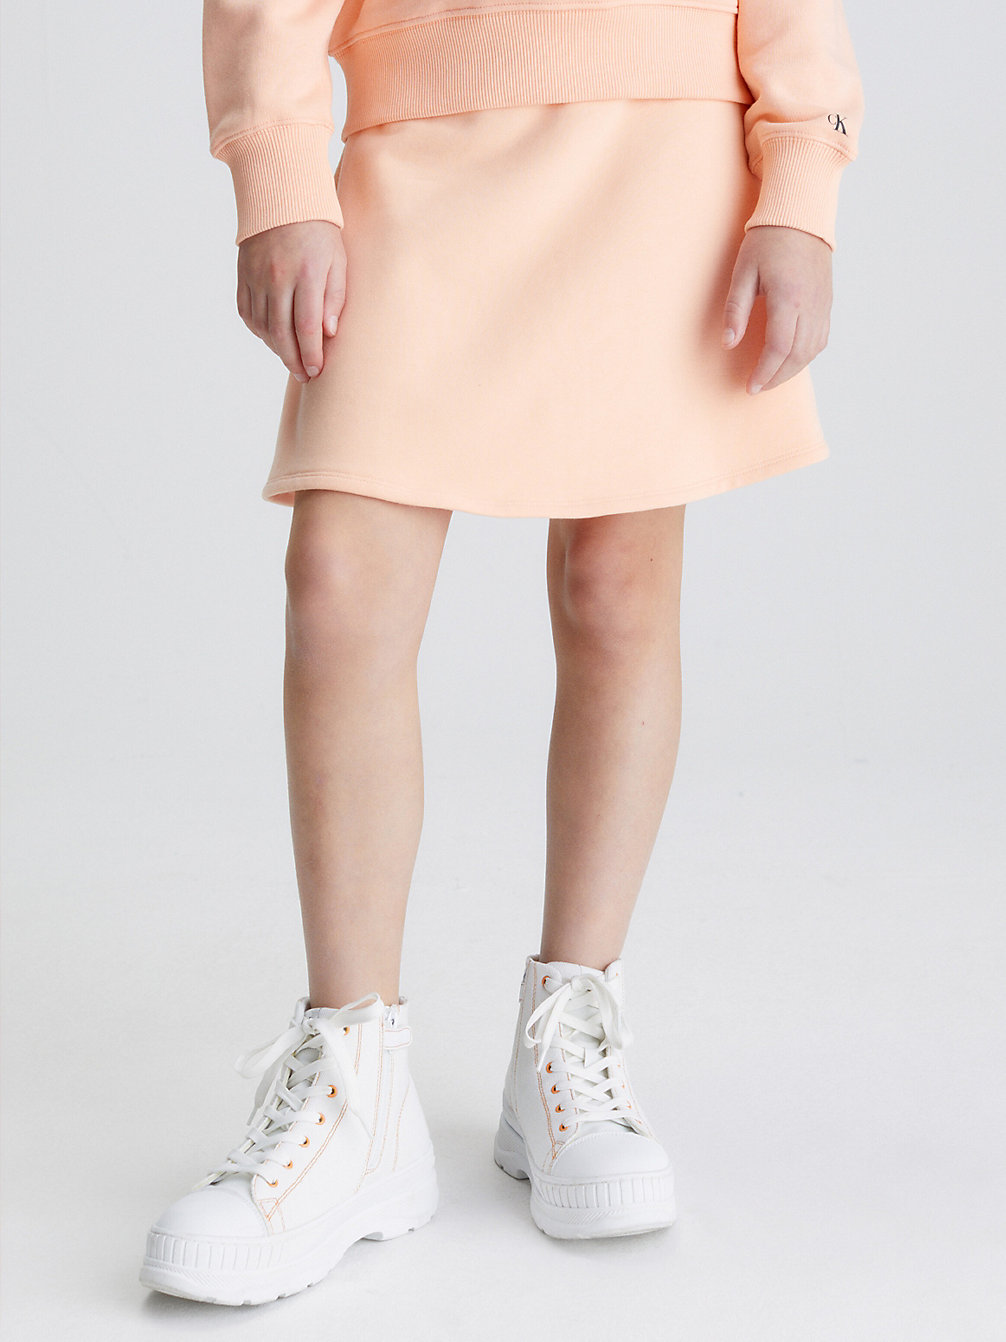 FRESH CANTALOUPE Stretch Terry Flared Skirt undefined girls Calvin Klein